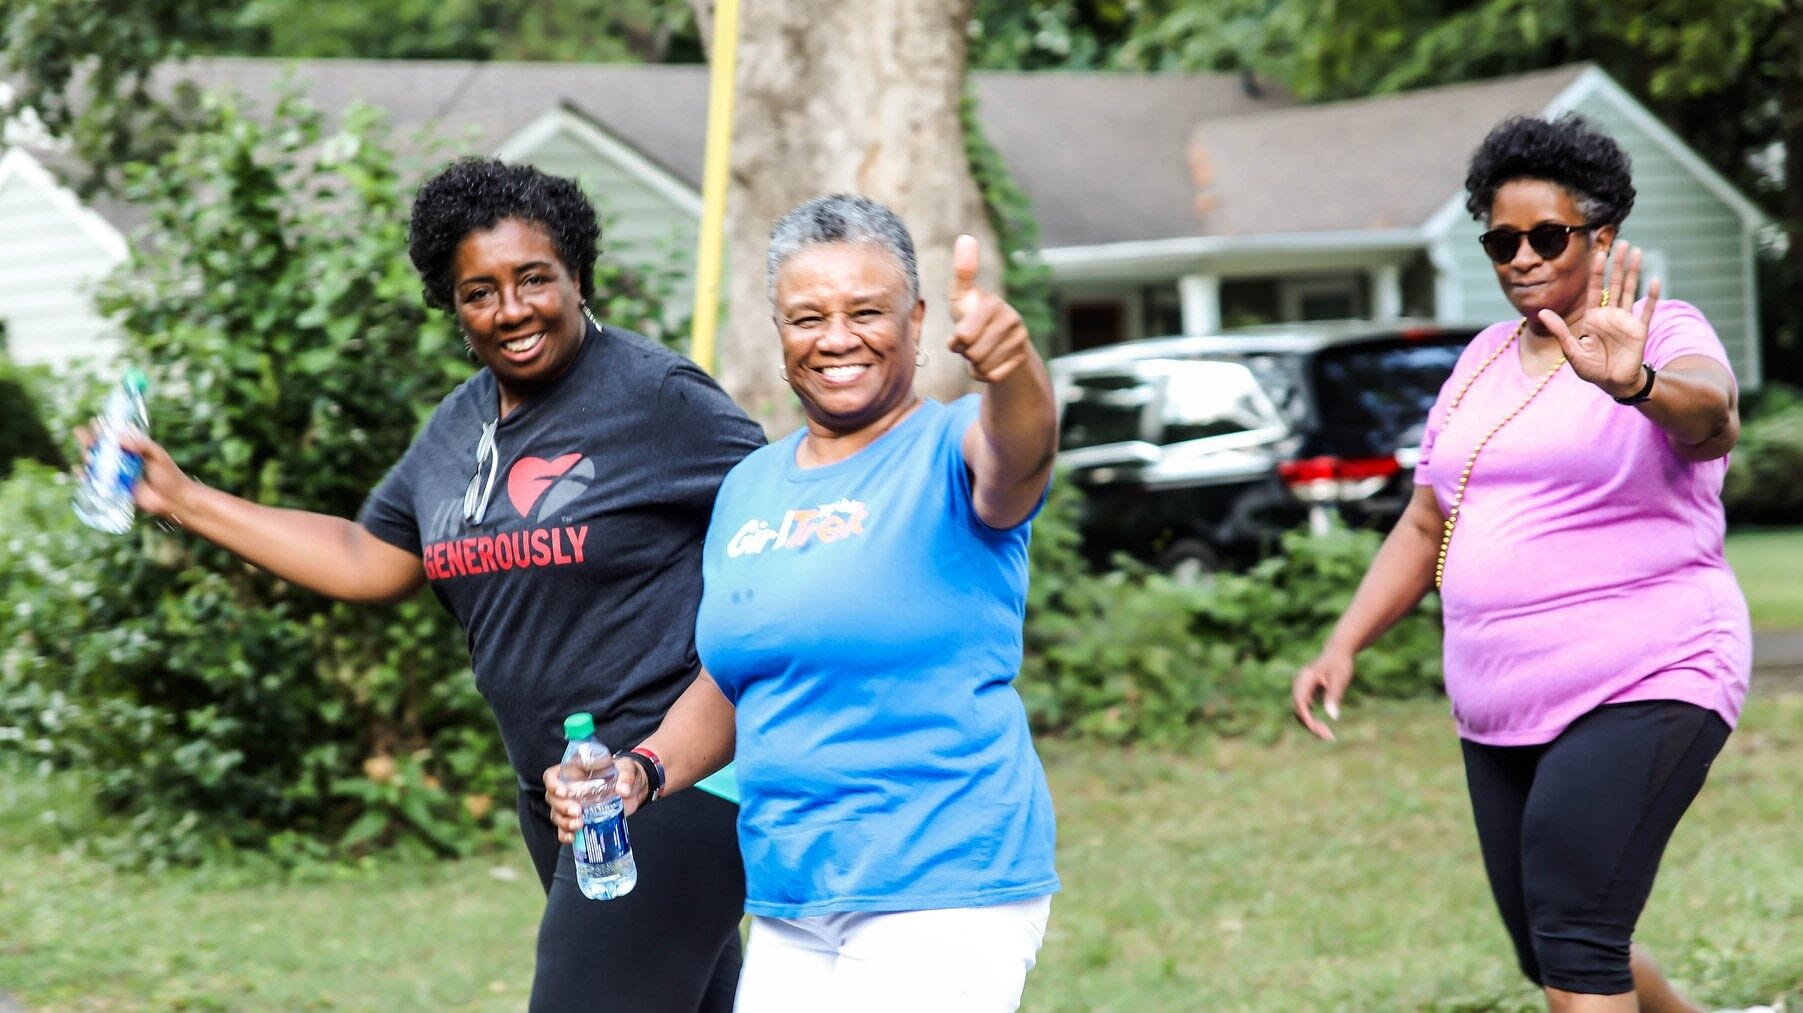 Source: Three older Black women smiling walking in a neighborhood with GirlTrek. One is giving a thumbs up, the others are waving